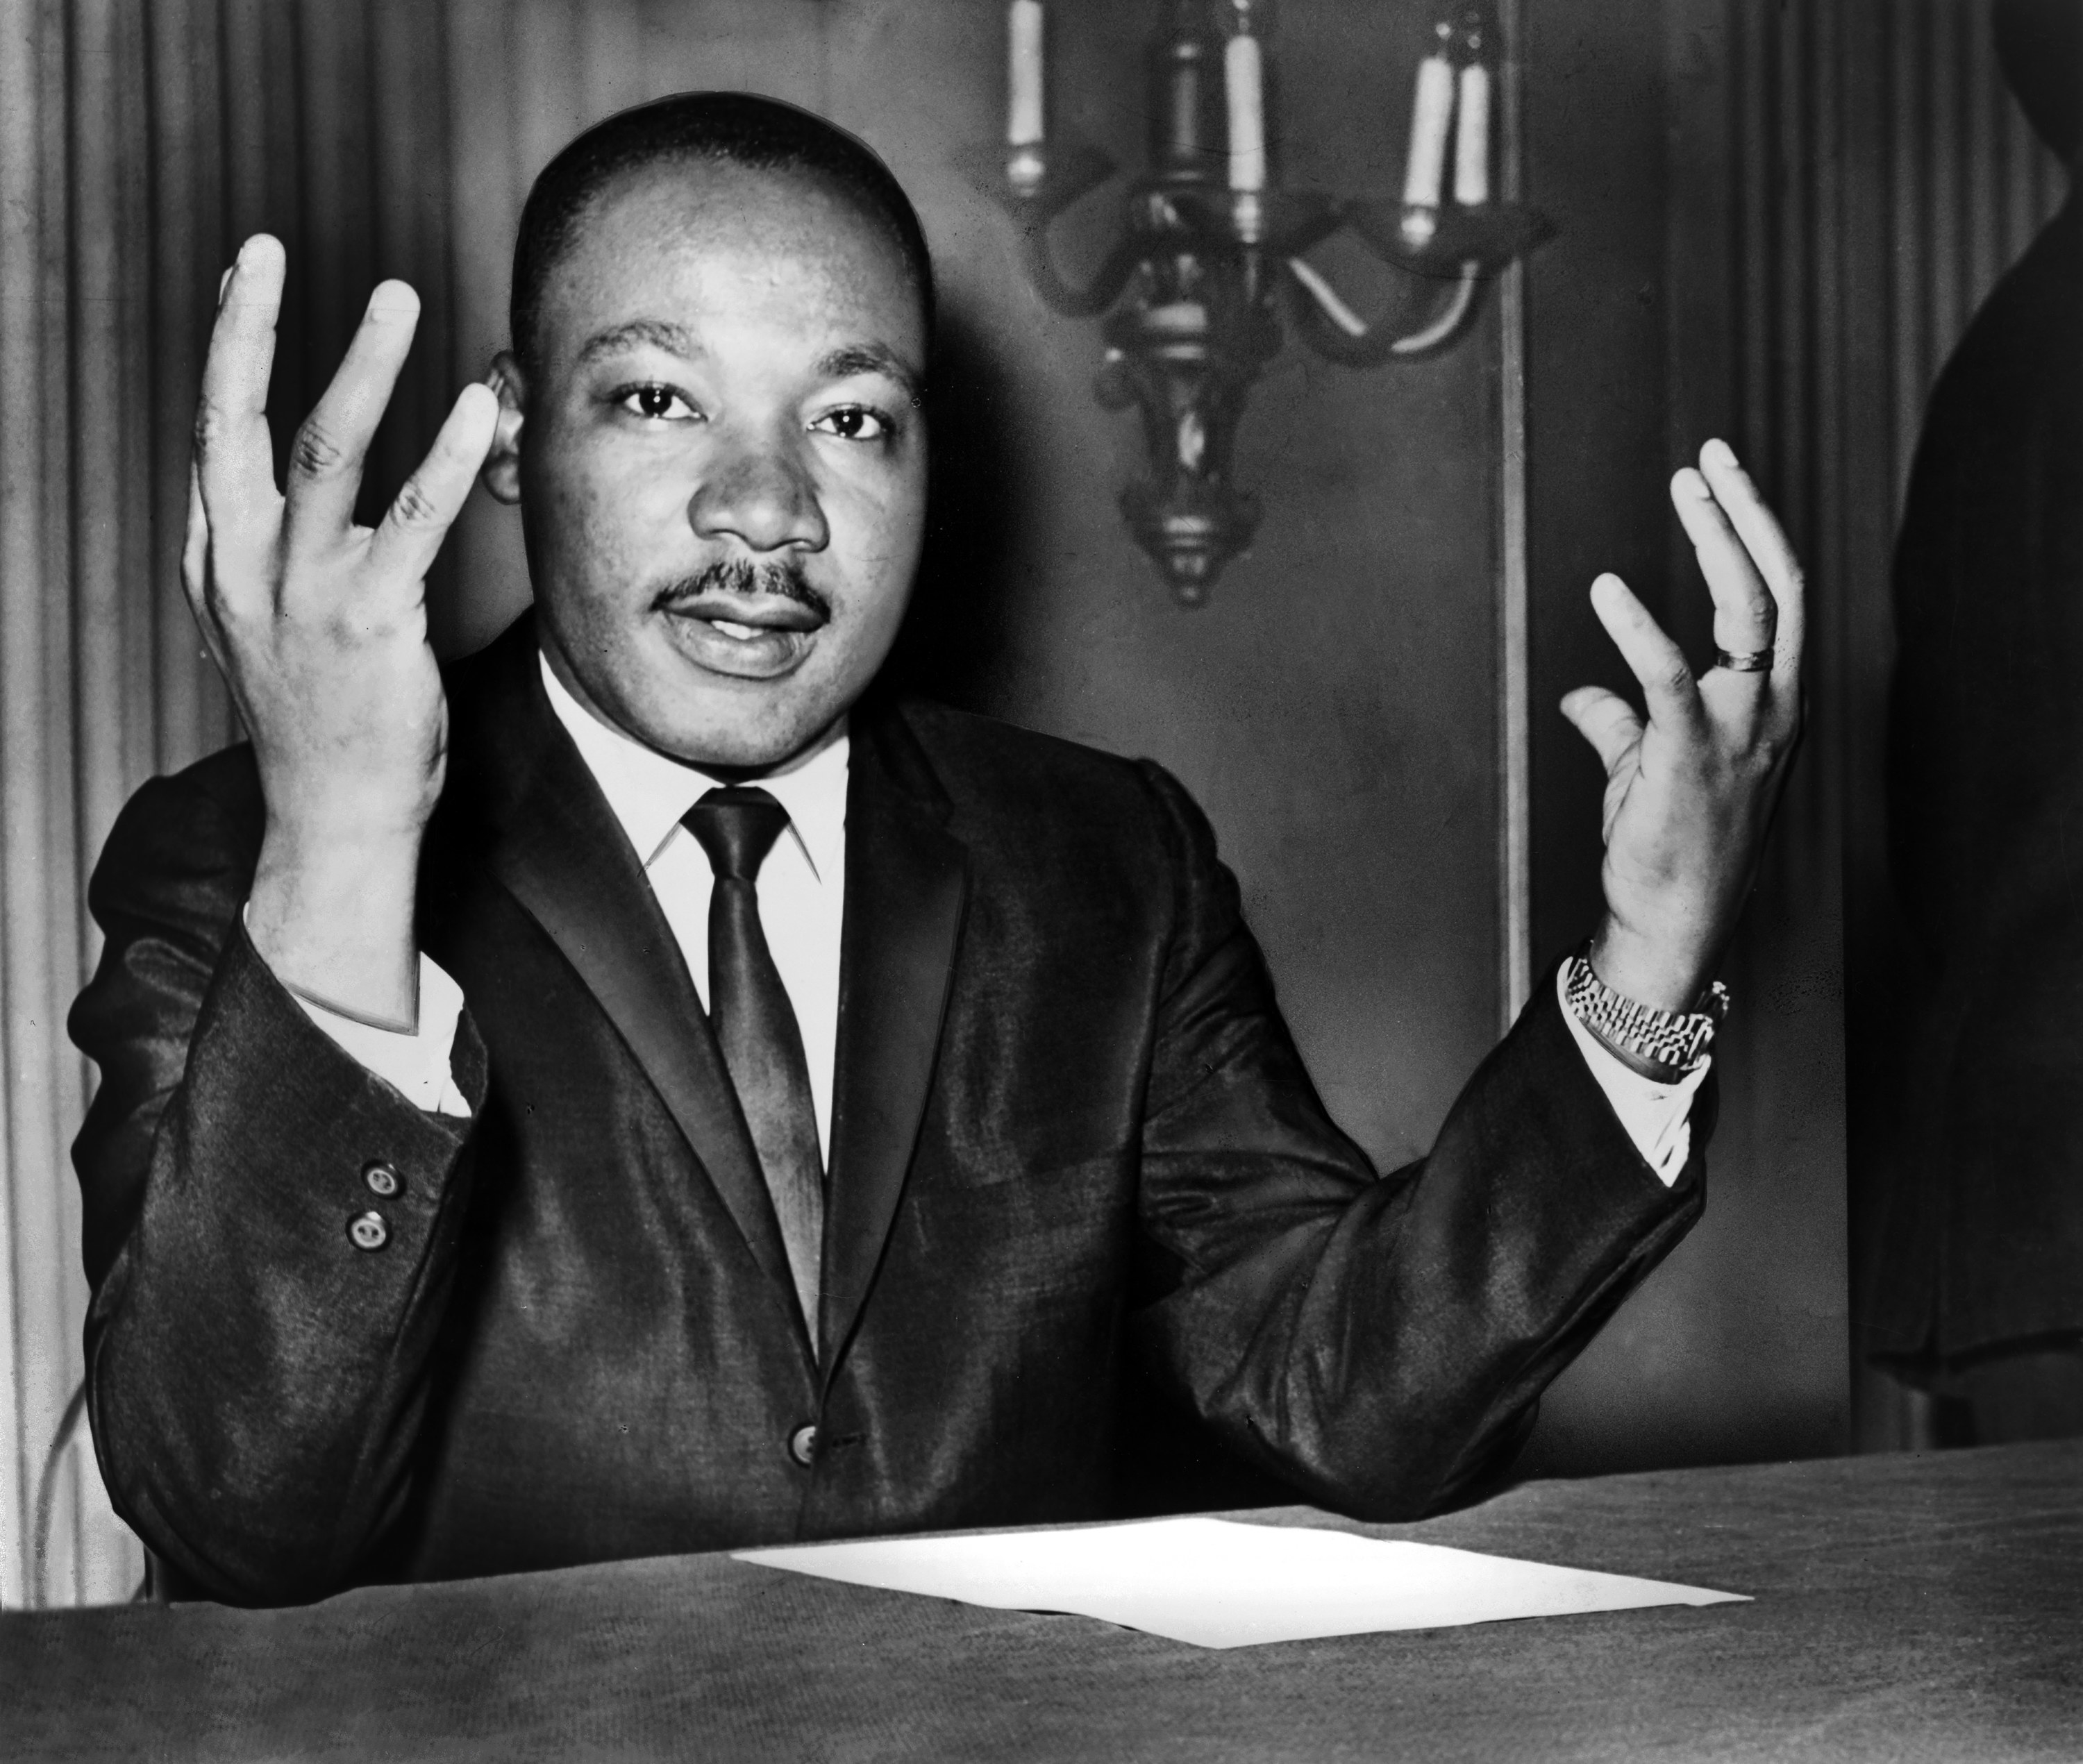 Casual photo of Martin Luther King, Jr. throwing his hands up